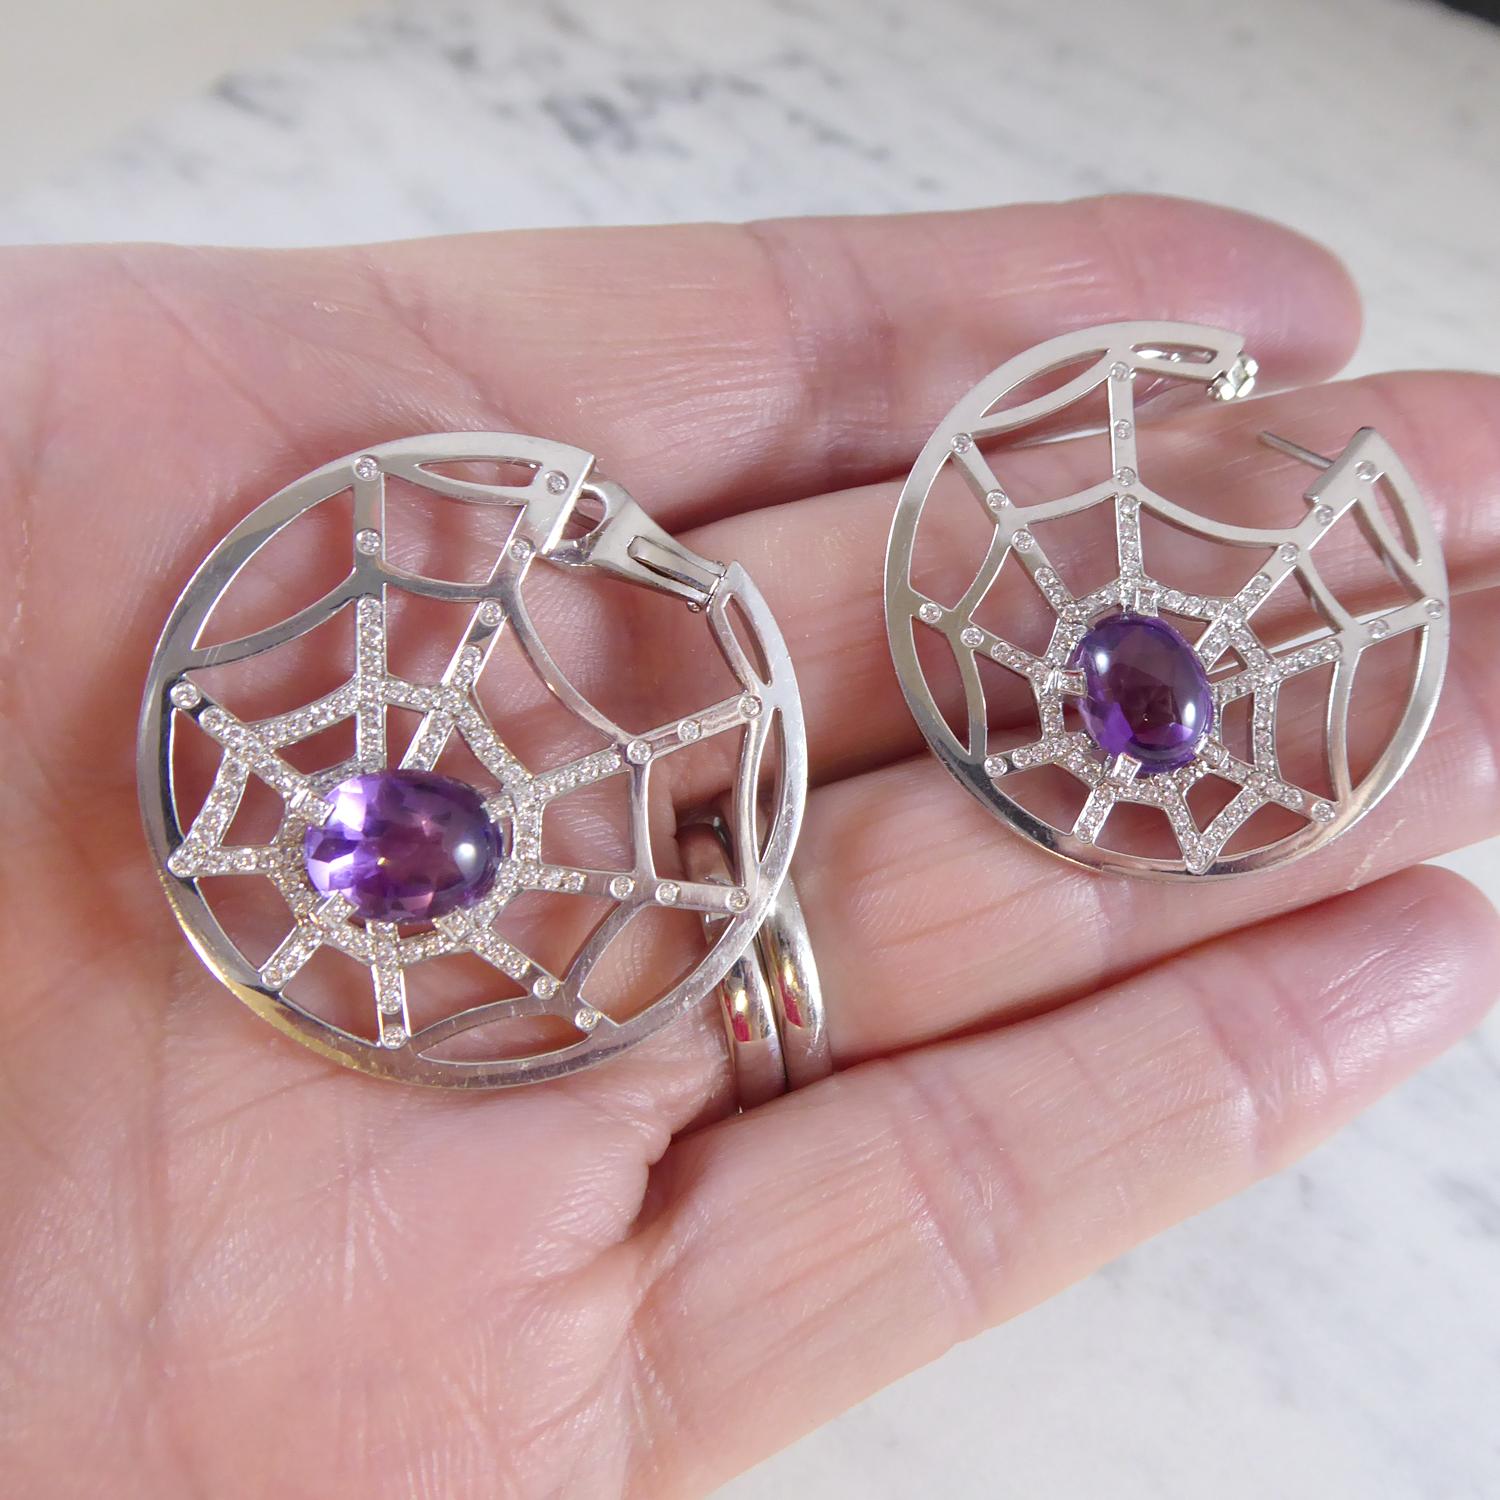 Chaumet Attrape-Moi Earrings, Diamond Set Spider's Web with Amethyst Spider 1